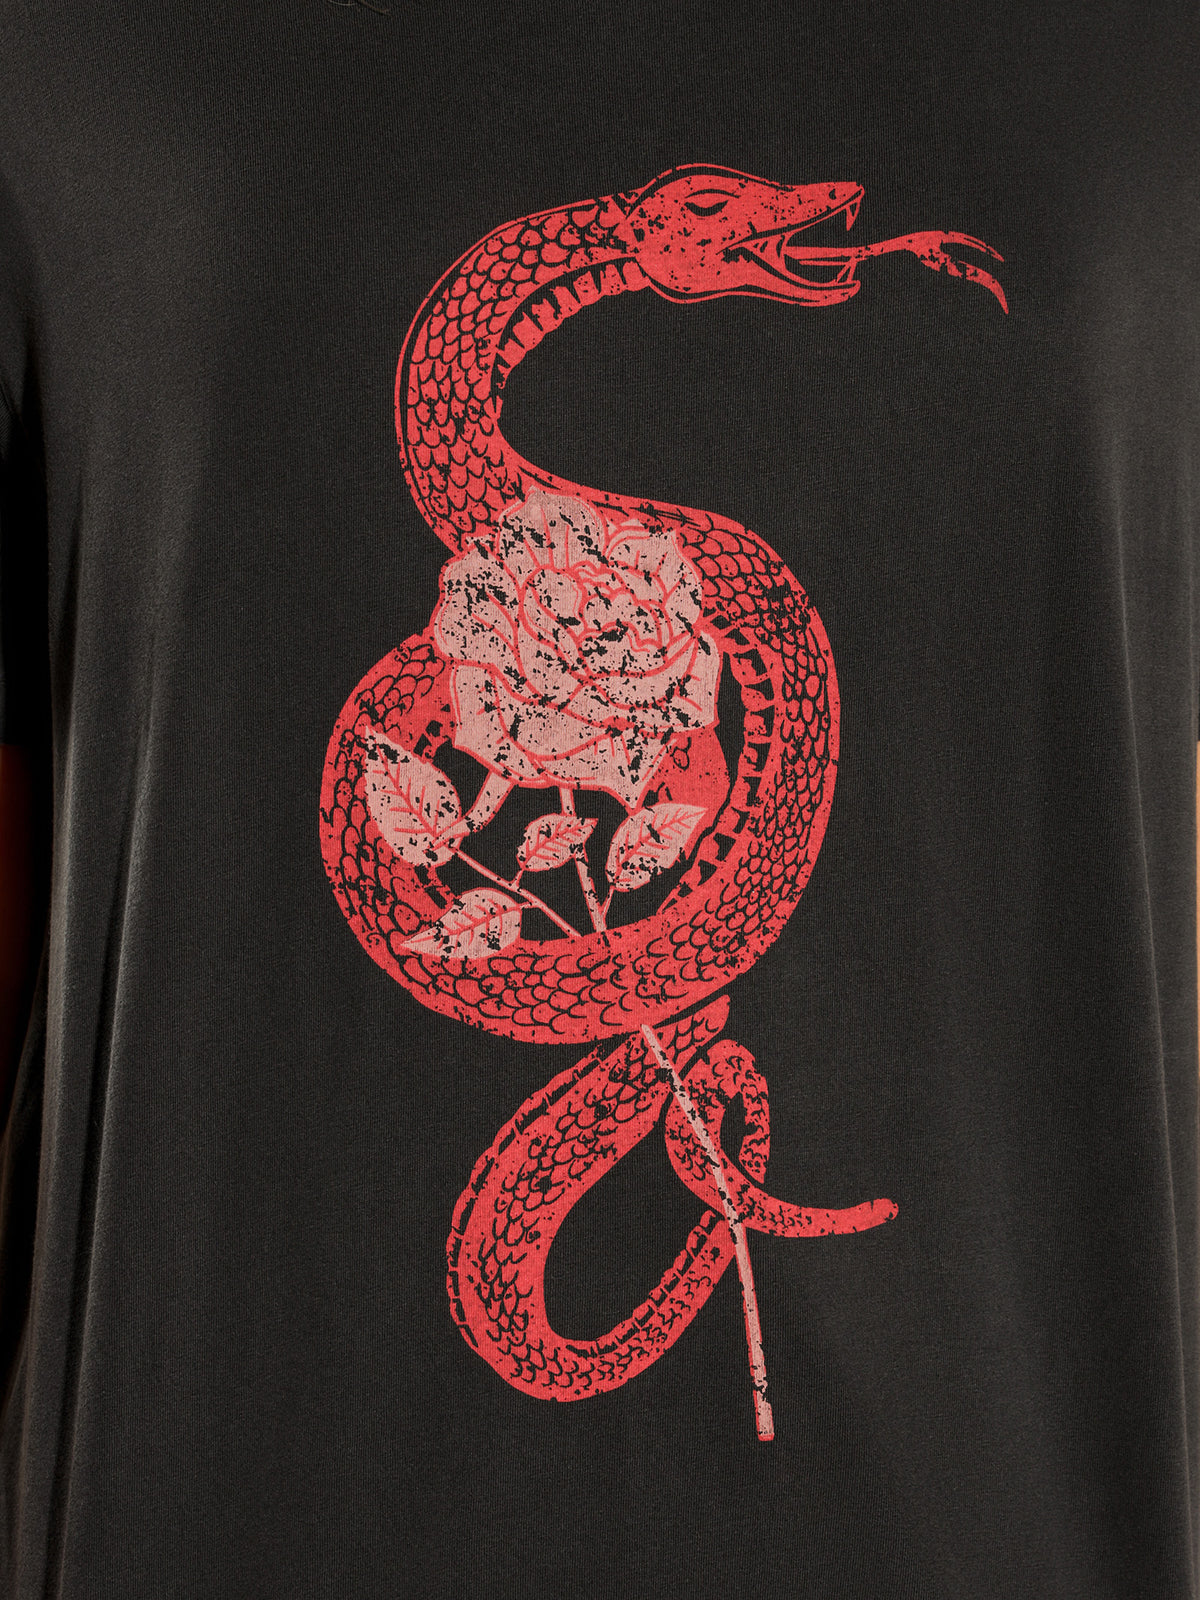 Red Snake Graphic T-Shirt in Washed Black